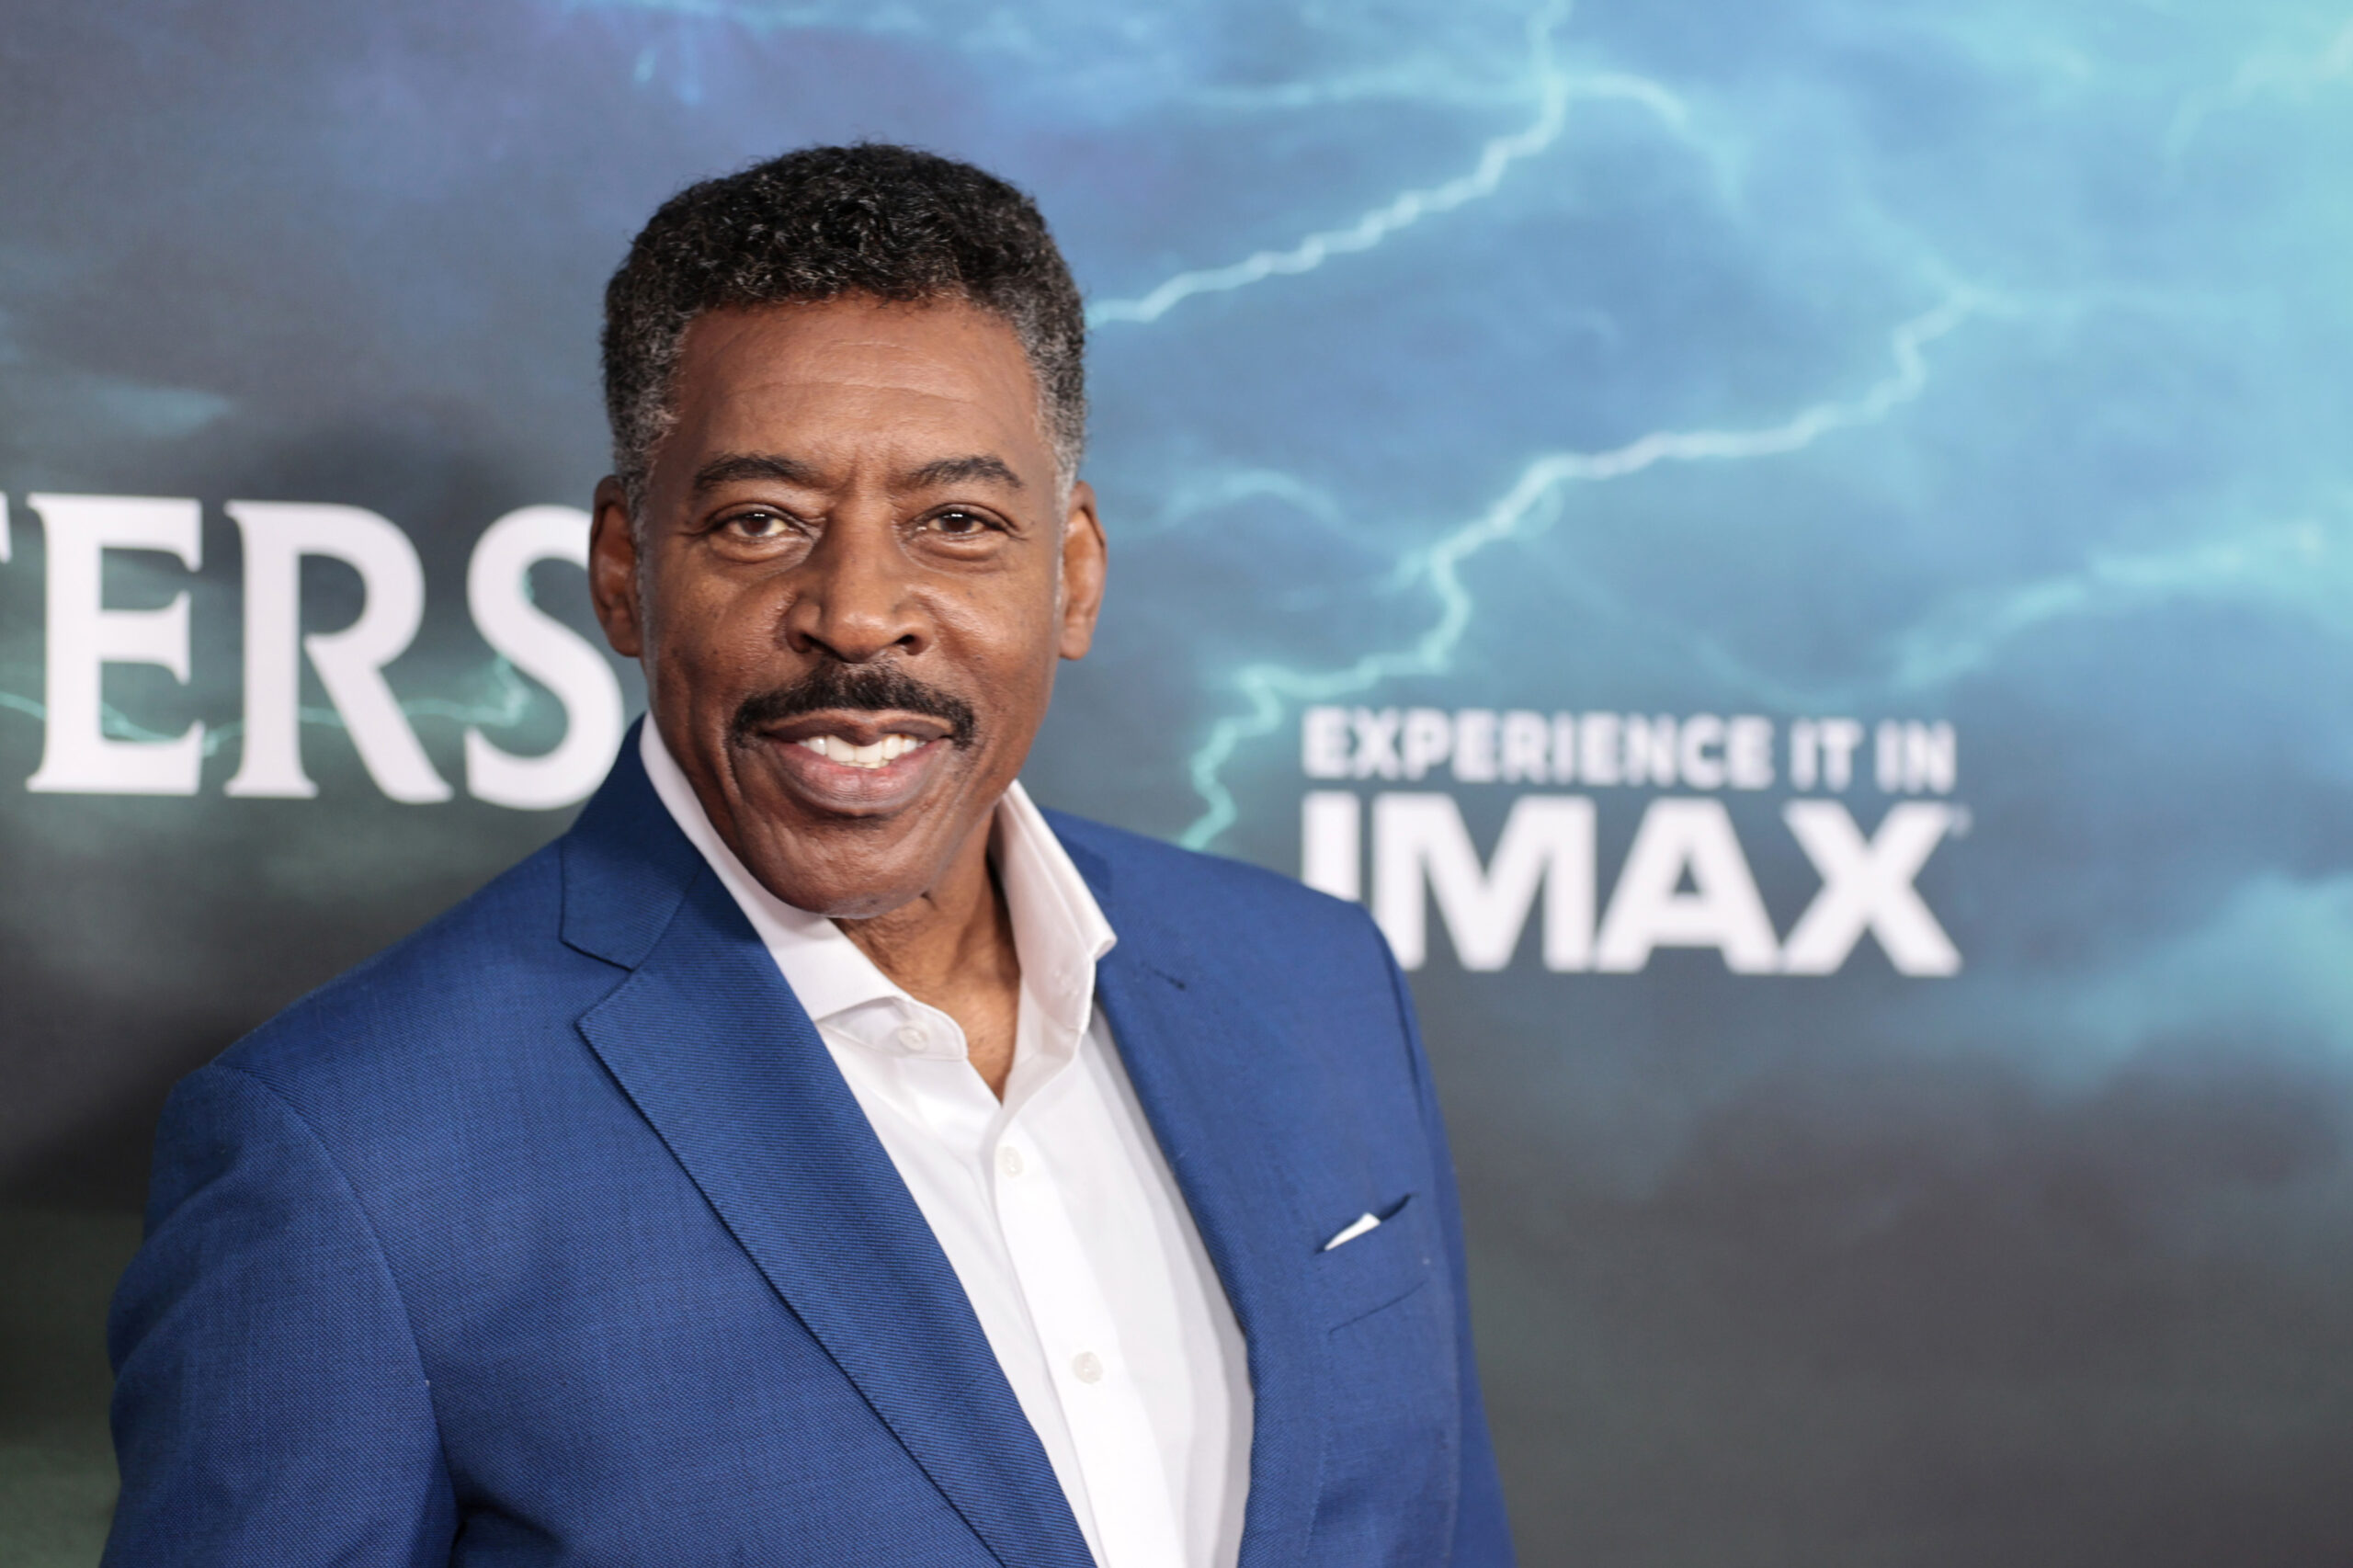 Ernie Hudson wearing a blue suit and white shirt at the Ghostbuster's premiere